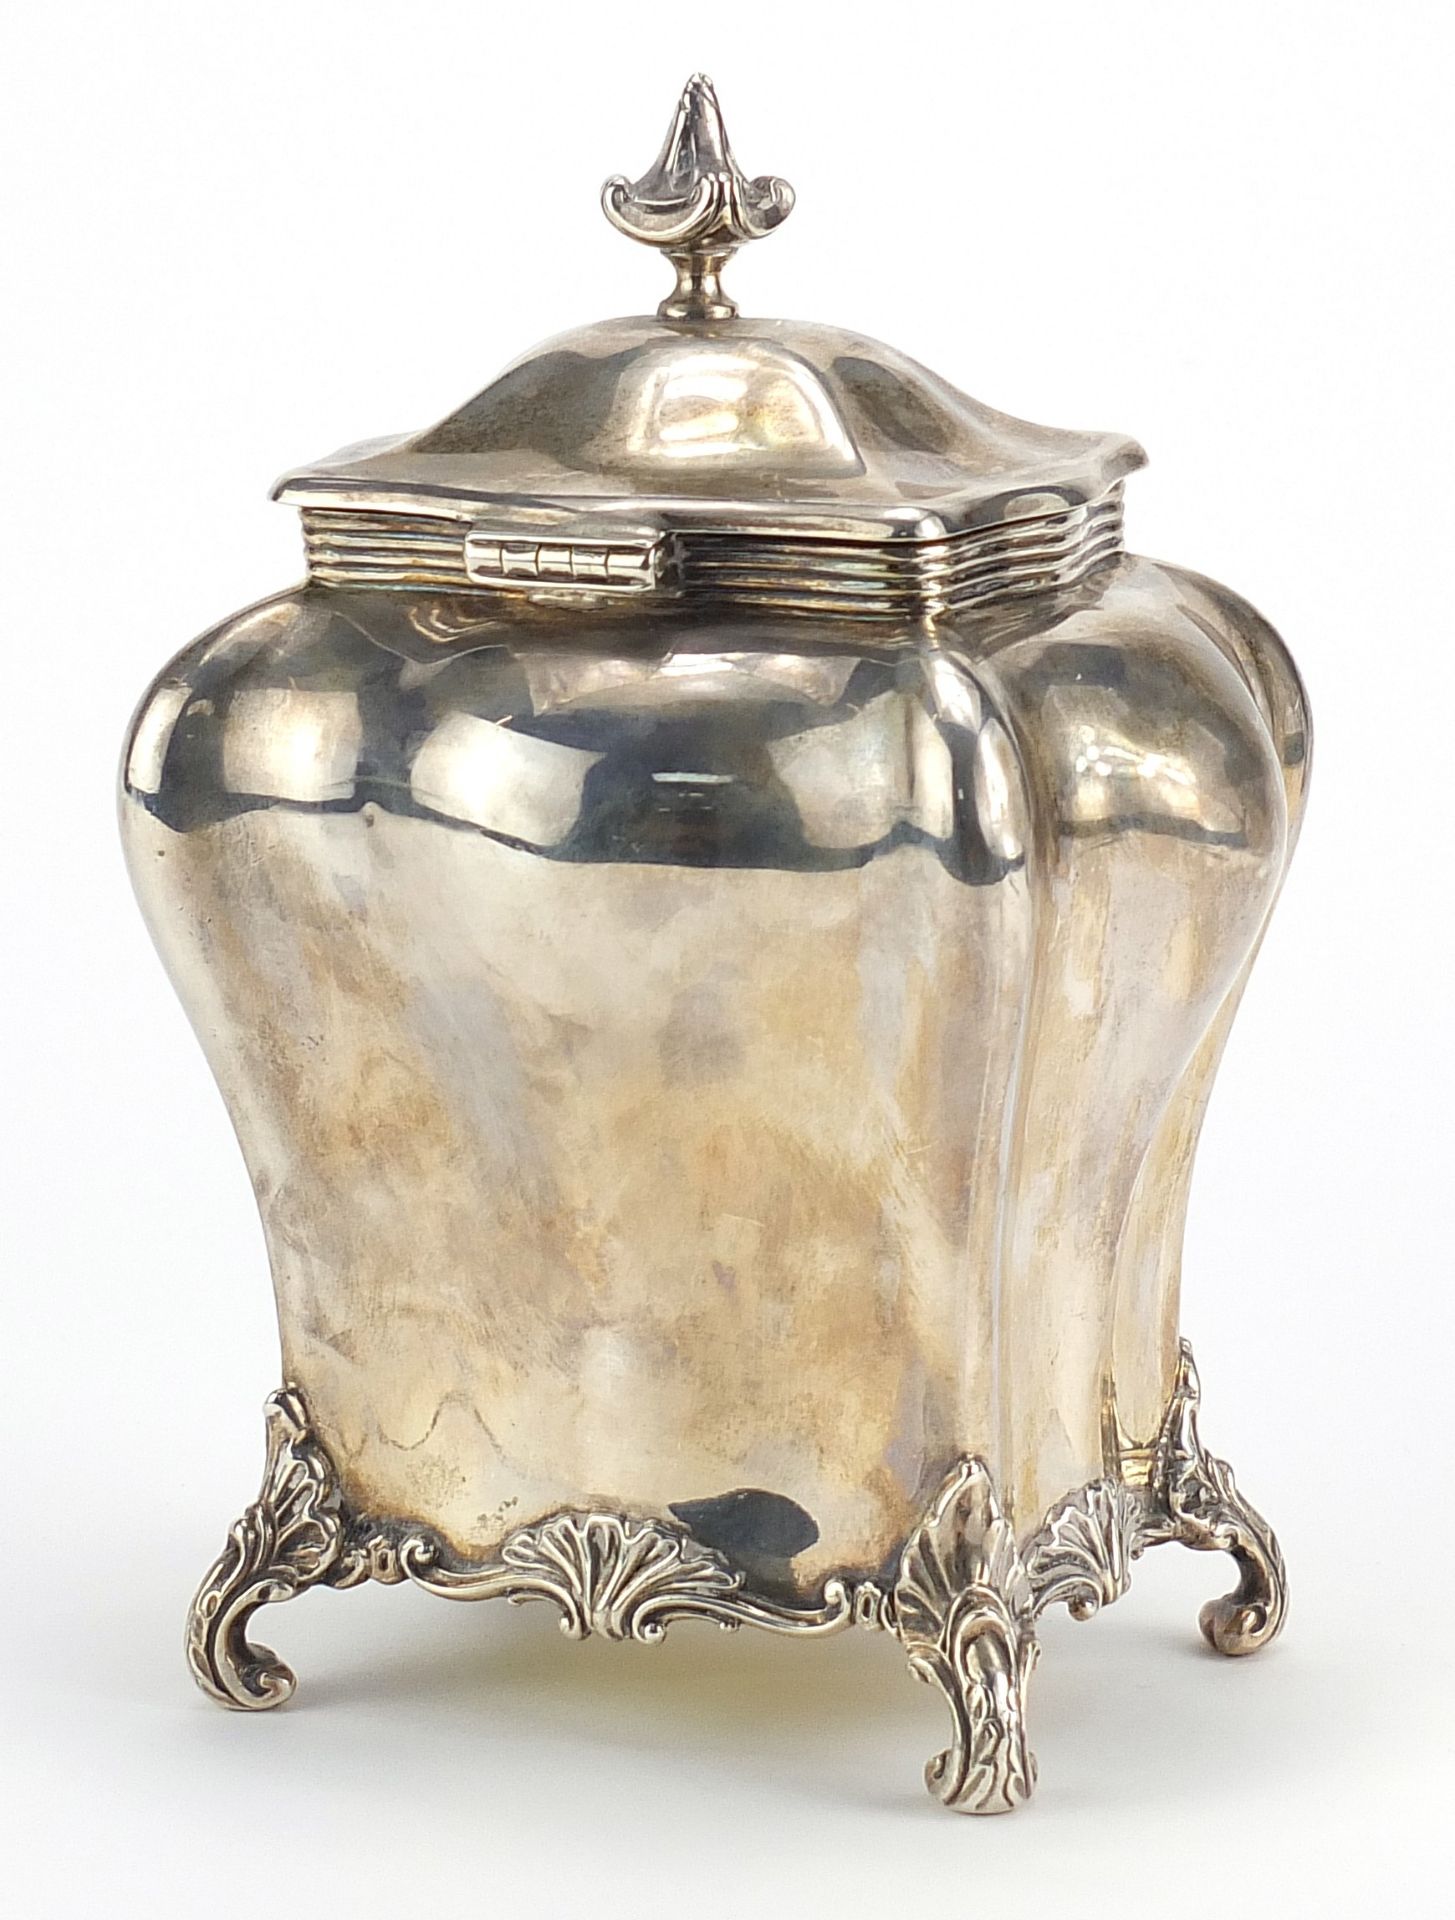 Lee & Wigfull, Edwardian silver tea caddy with hinged lid, Sheffield 1903, 16cm high, 312.6g - Image 2 of 4